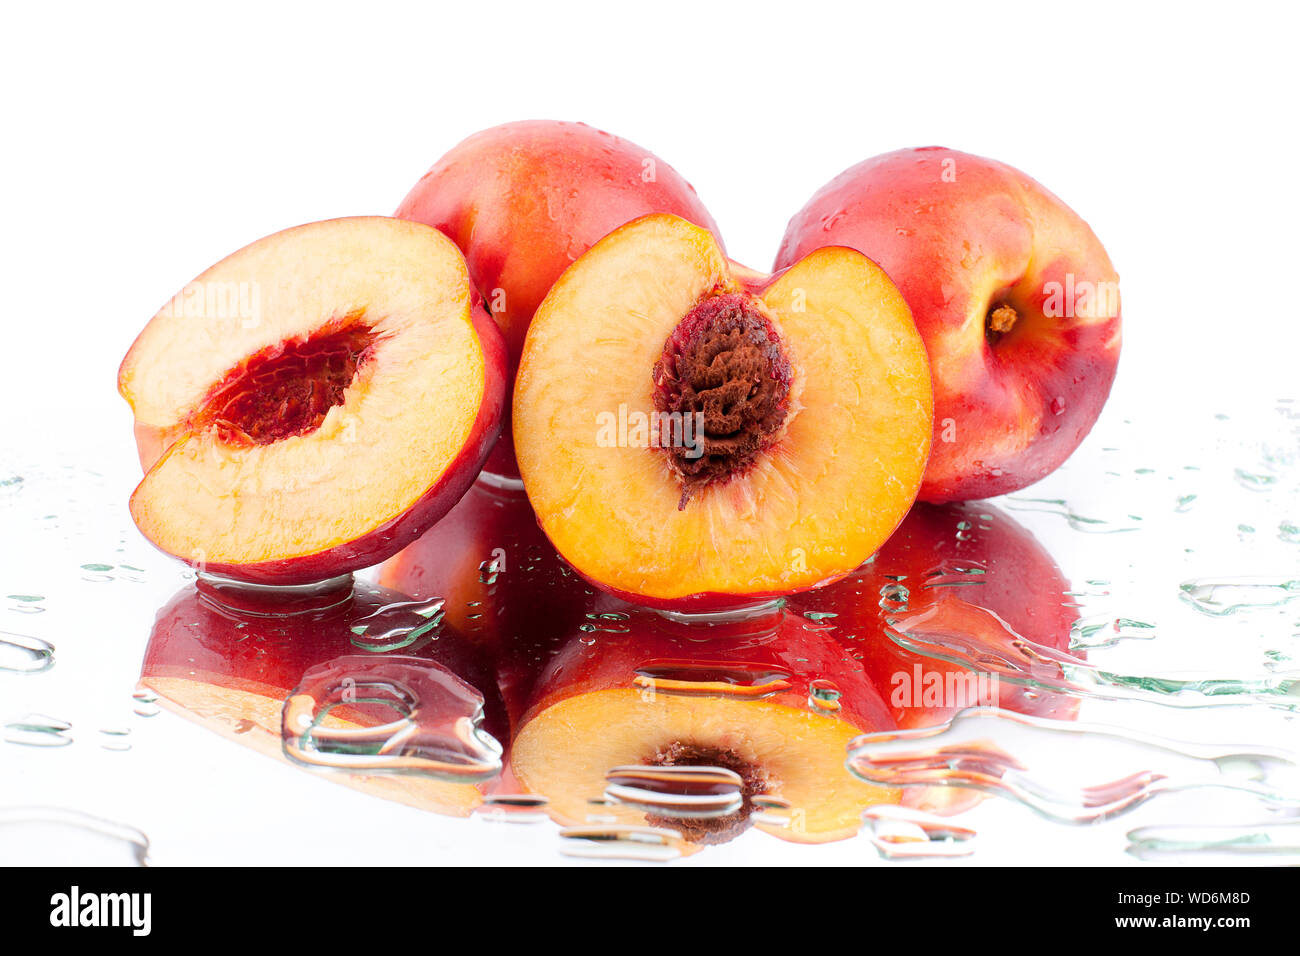 Whole peaches and two halves of a peach with a stone inside on a white mirror background with reflection in water drops close up isolated Stock Photo